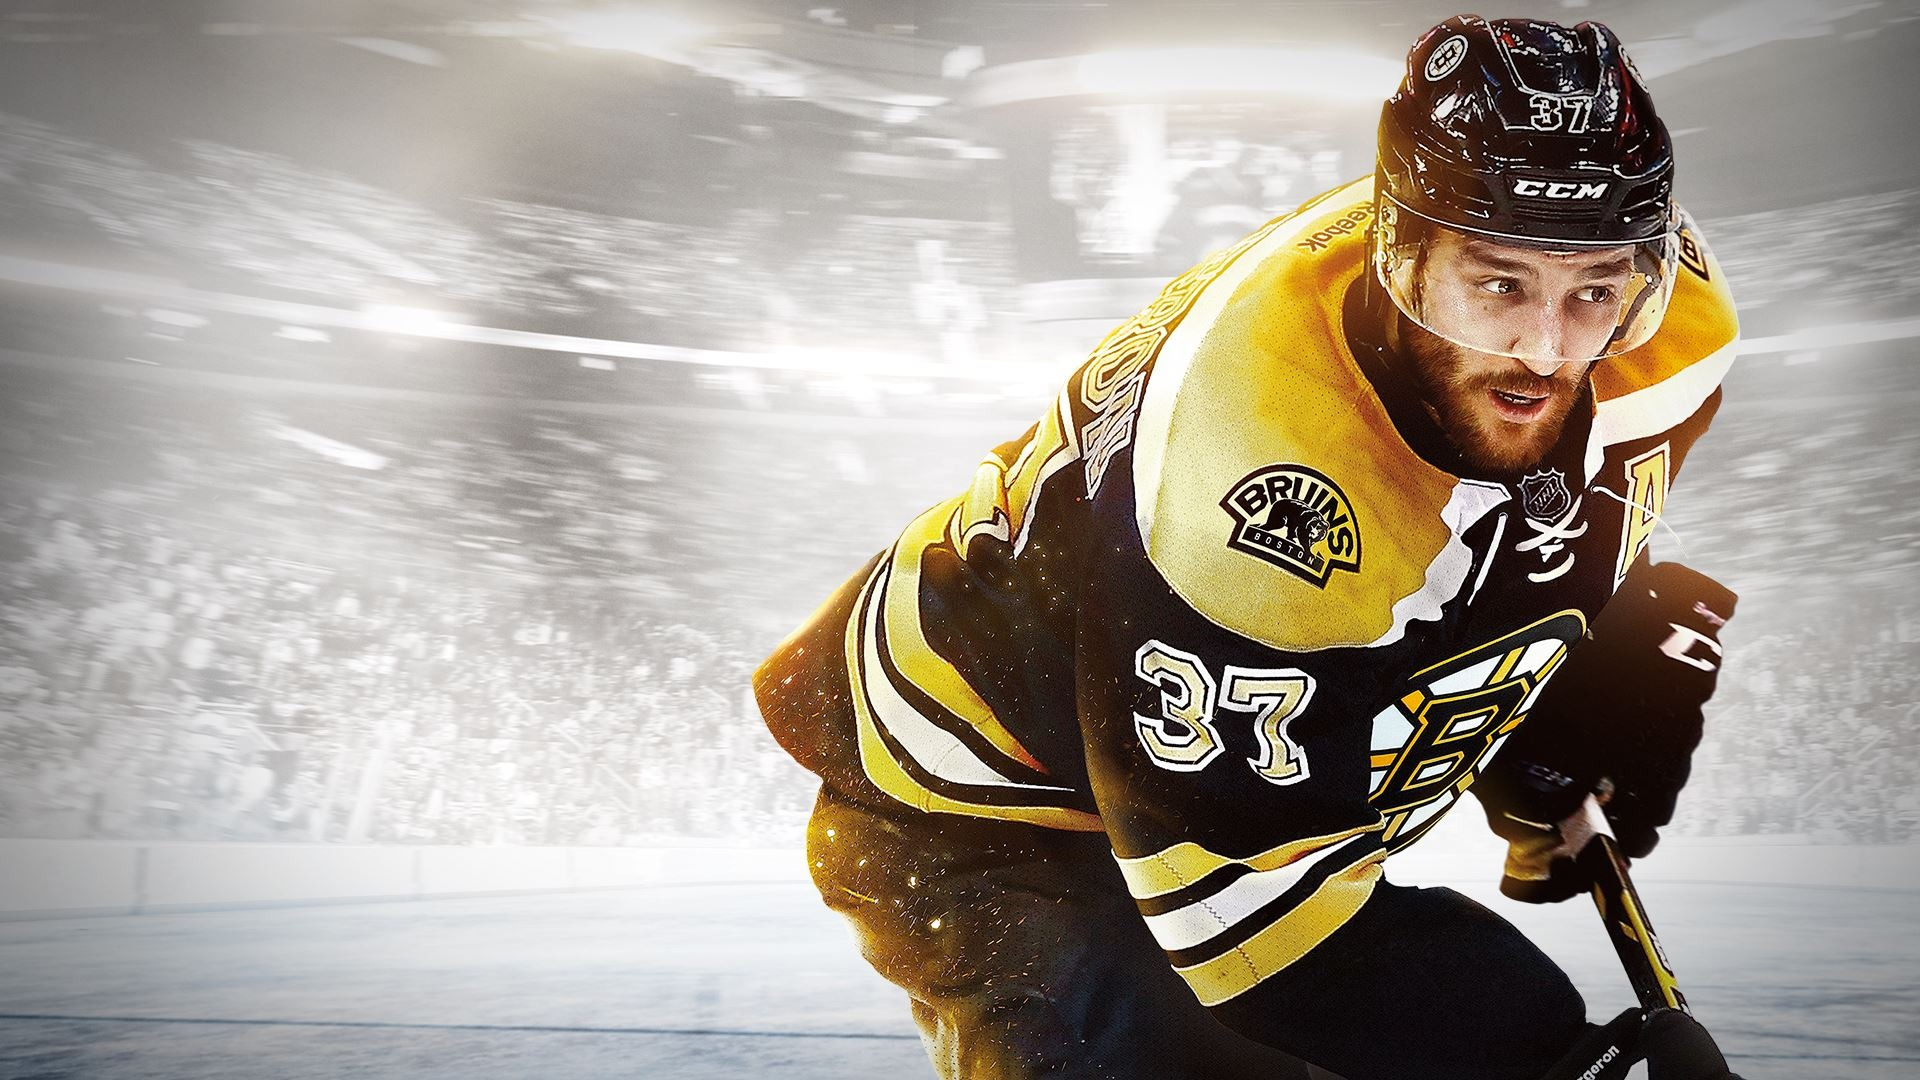 1920x1080 20+ Hockey HD Wallpapers and Backgrounds